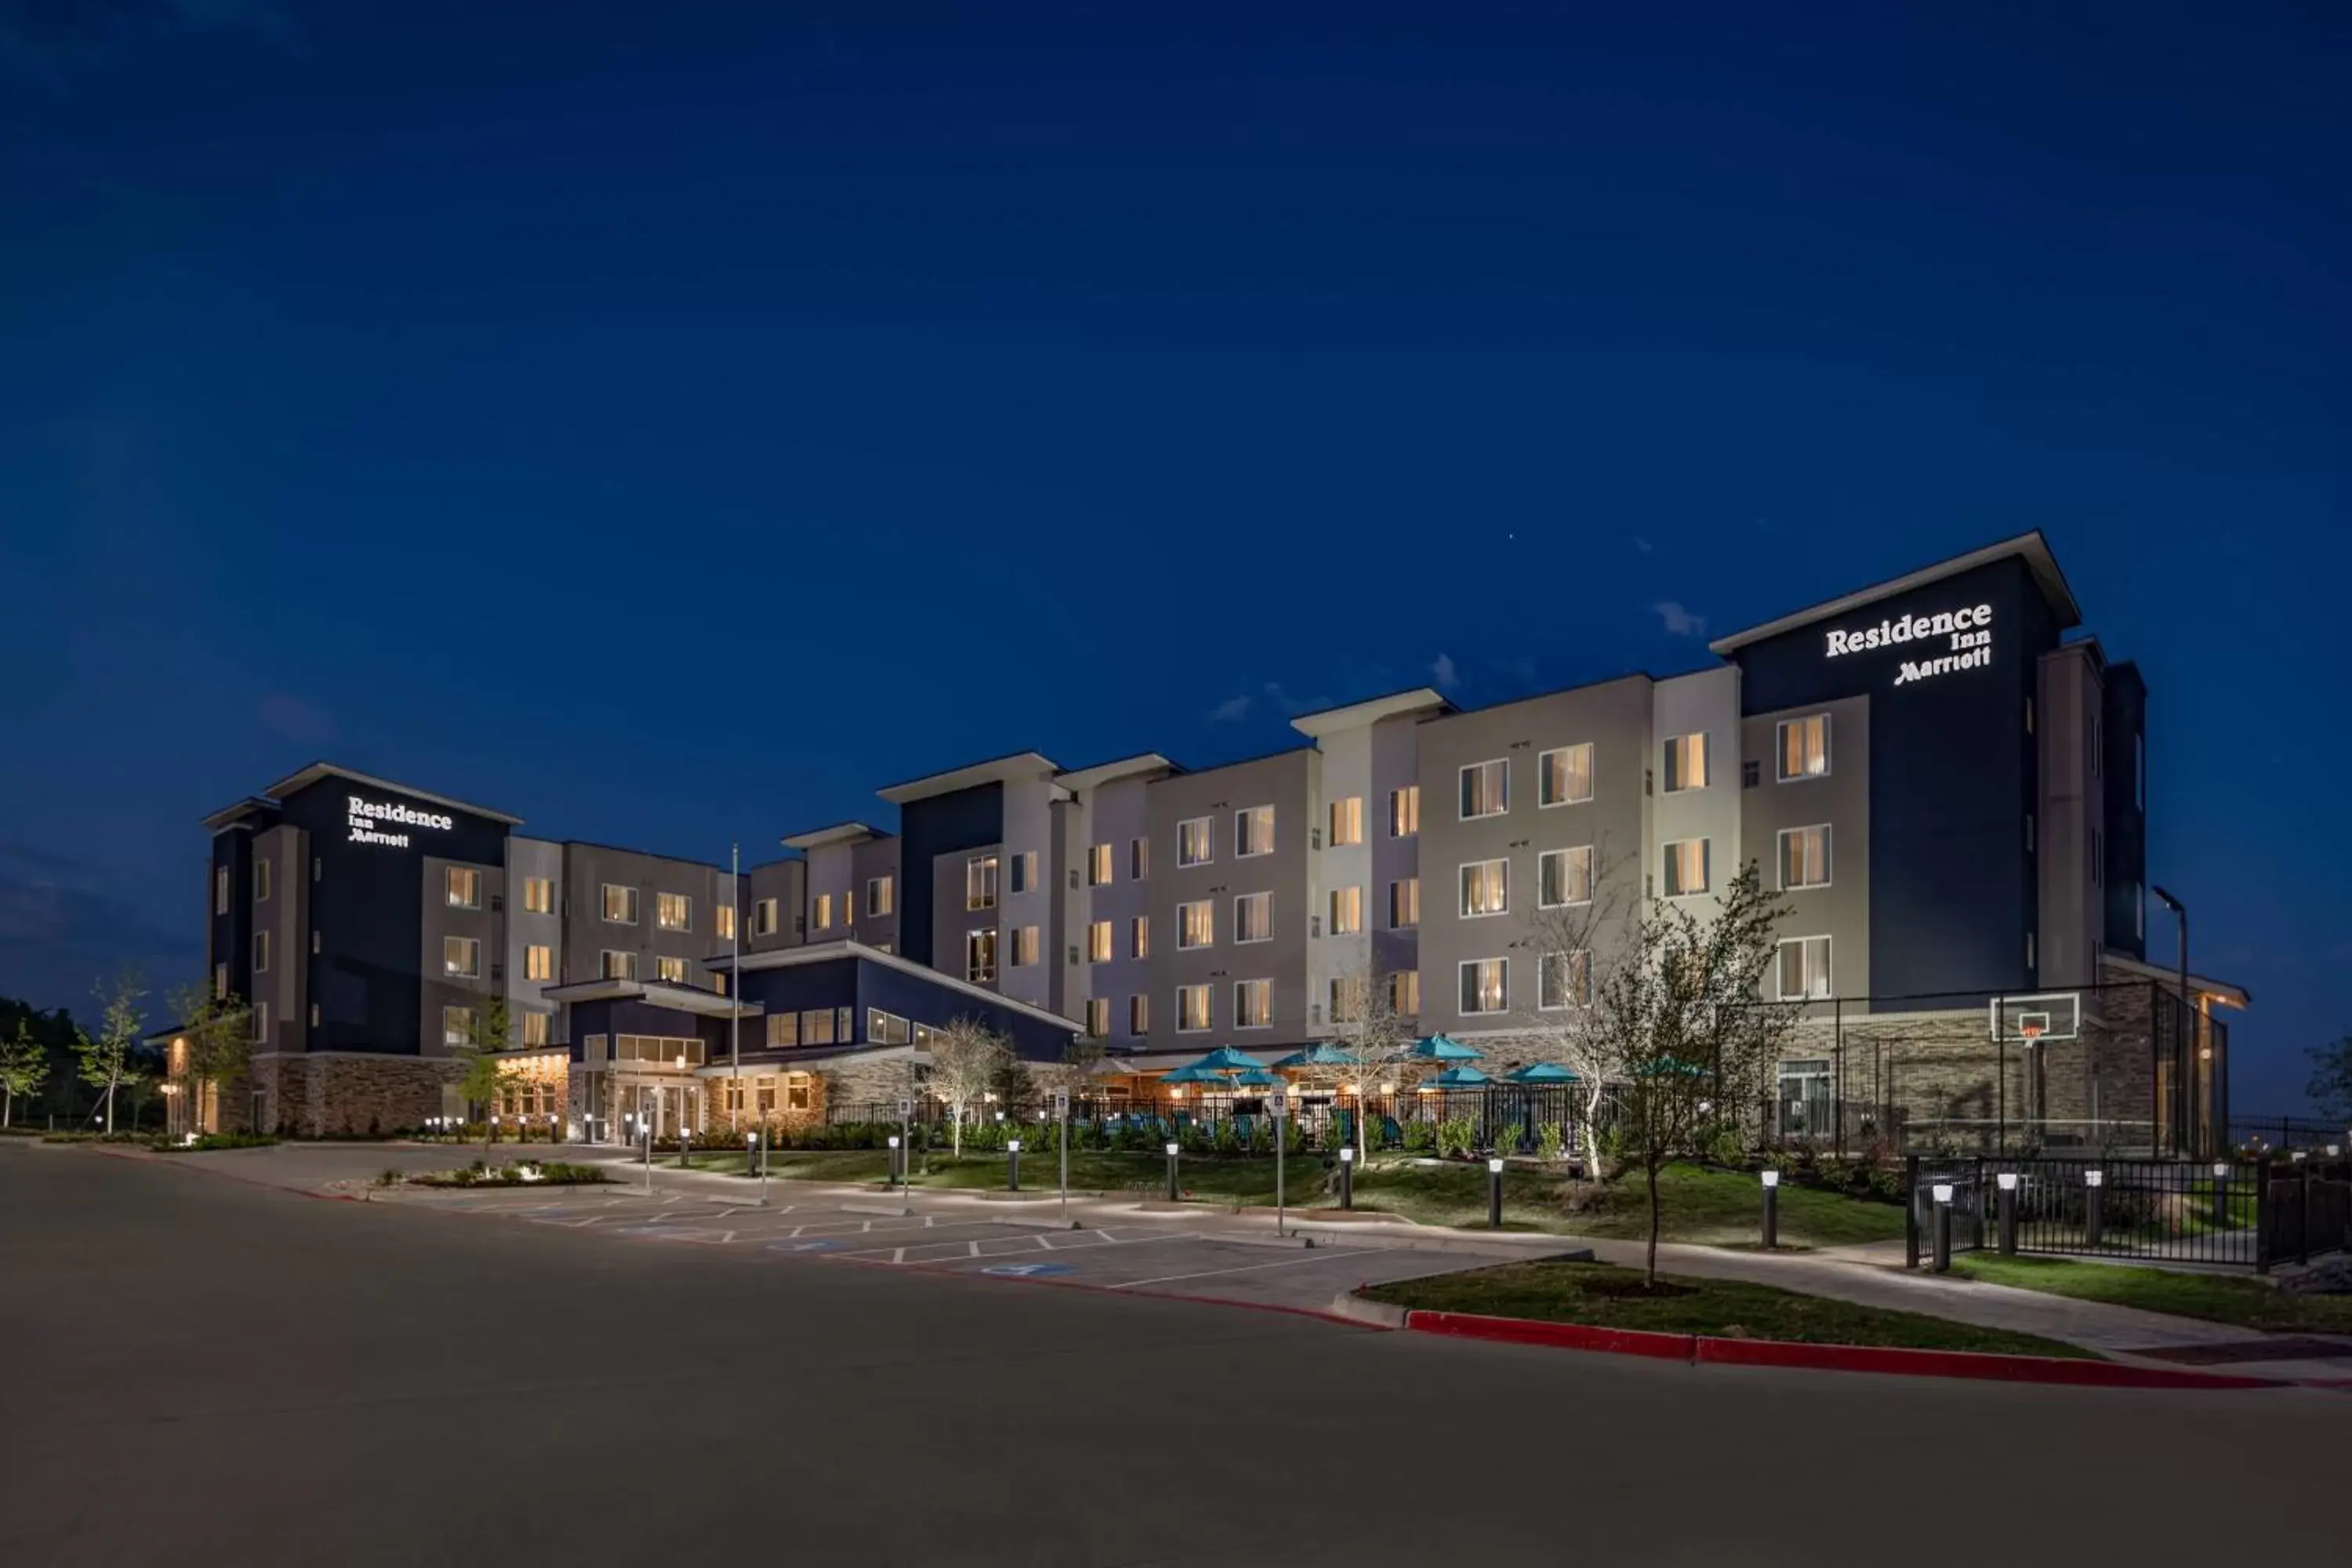 Property Building in Residence Inn by Marriott Dallas at The Canyon